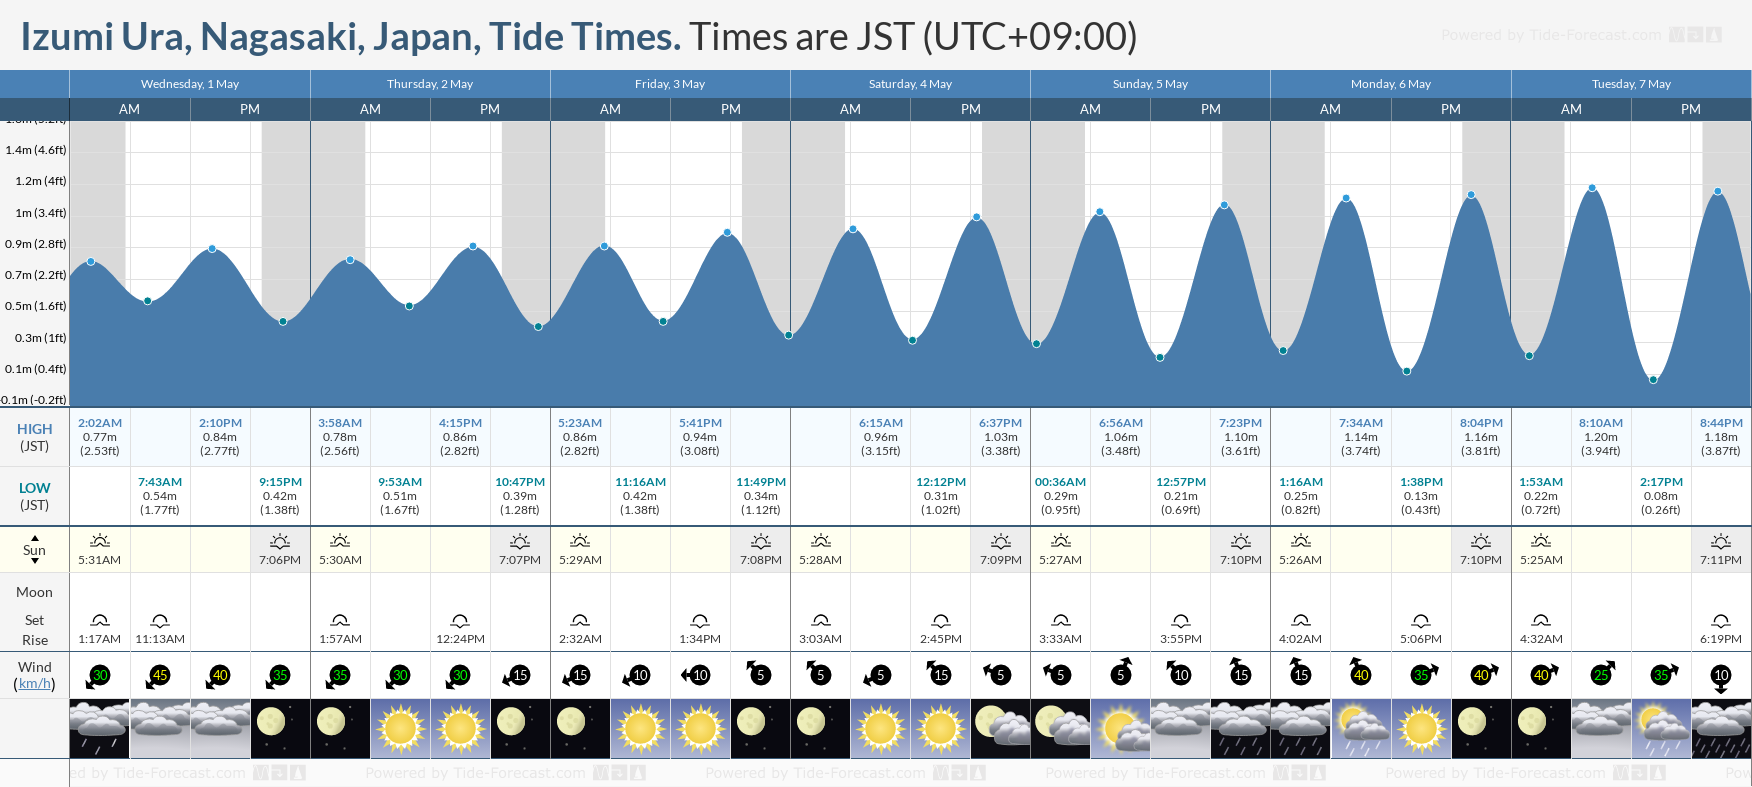 Izumi Ura, Nagasaki, Japan Tide Chart including high and low tide tide times for the next 7 days